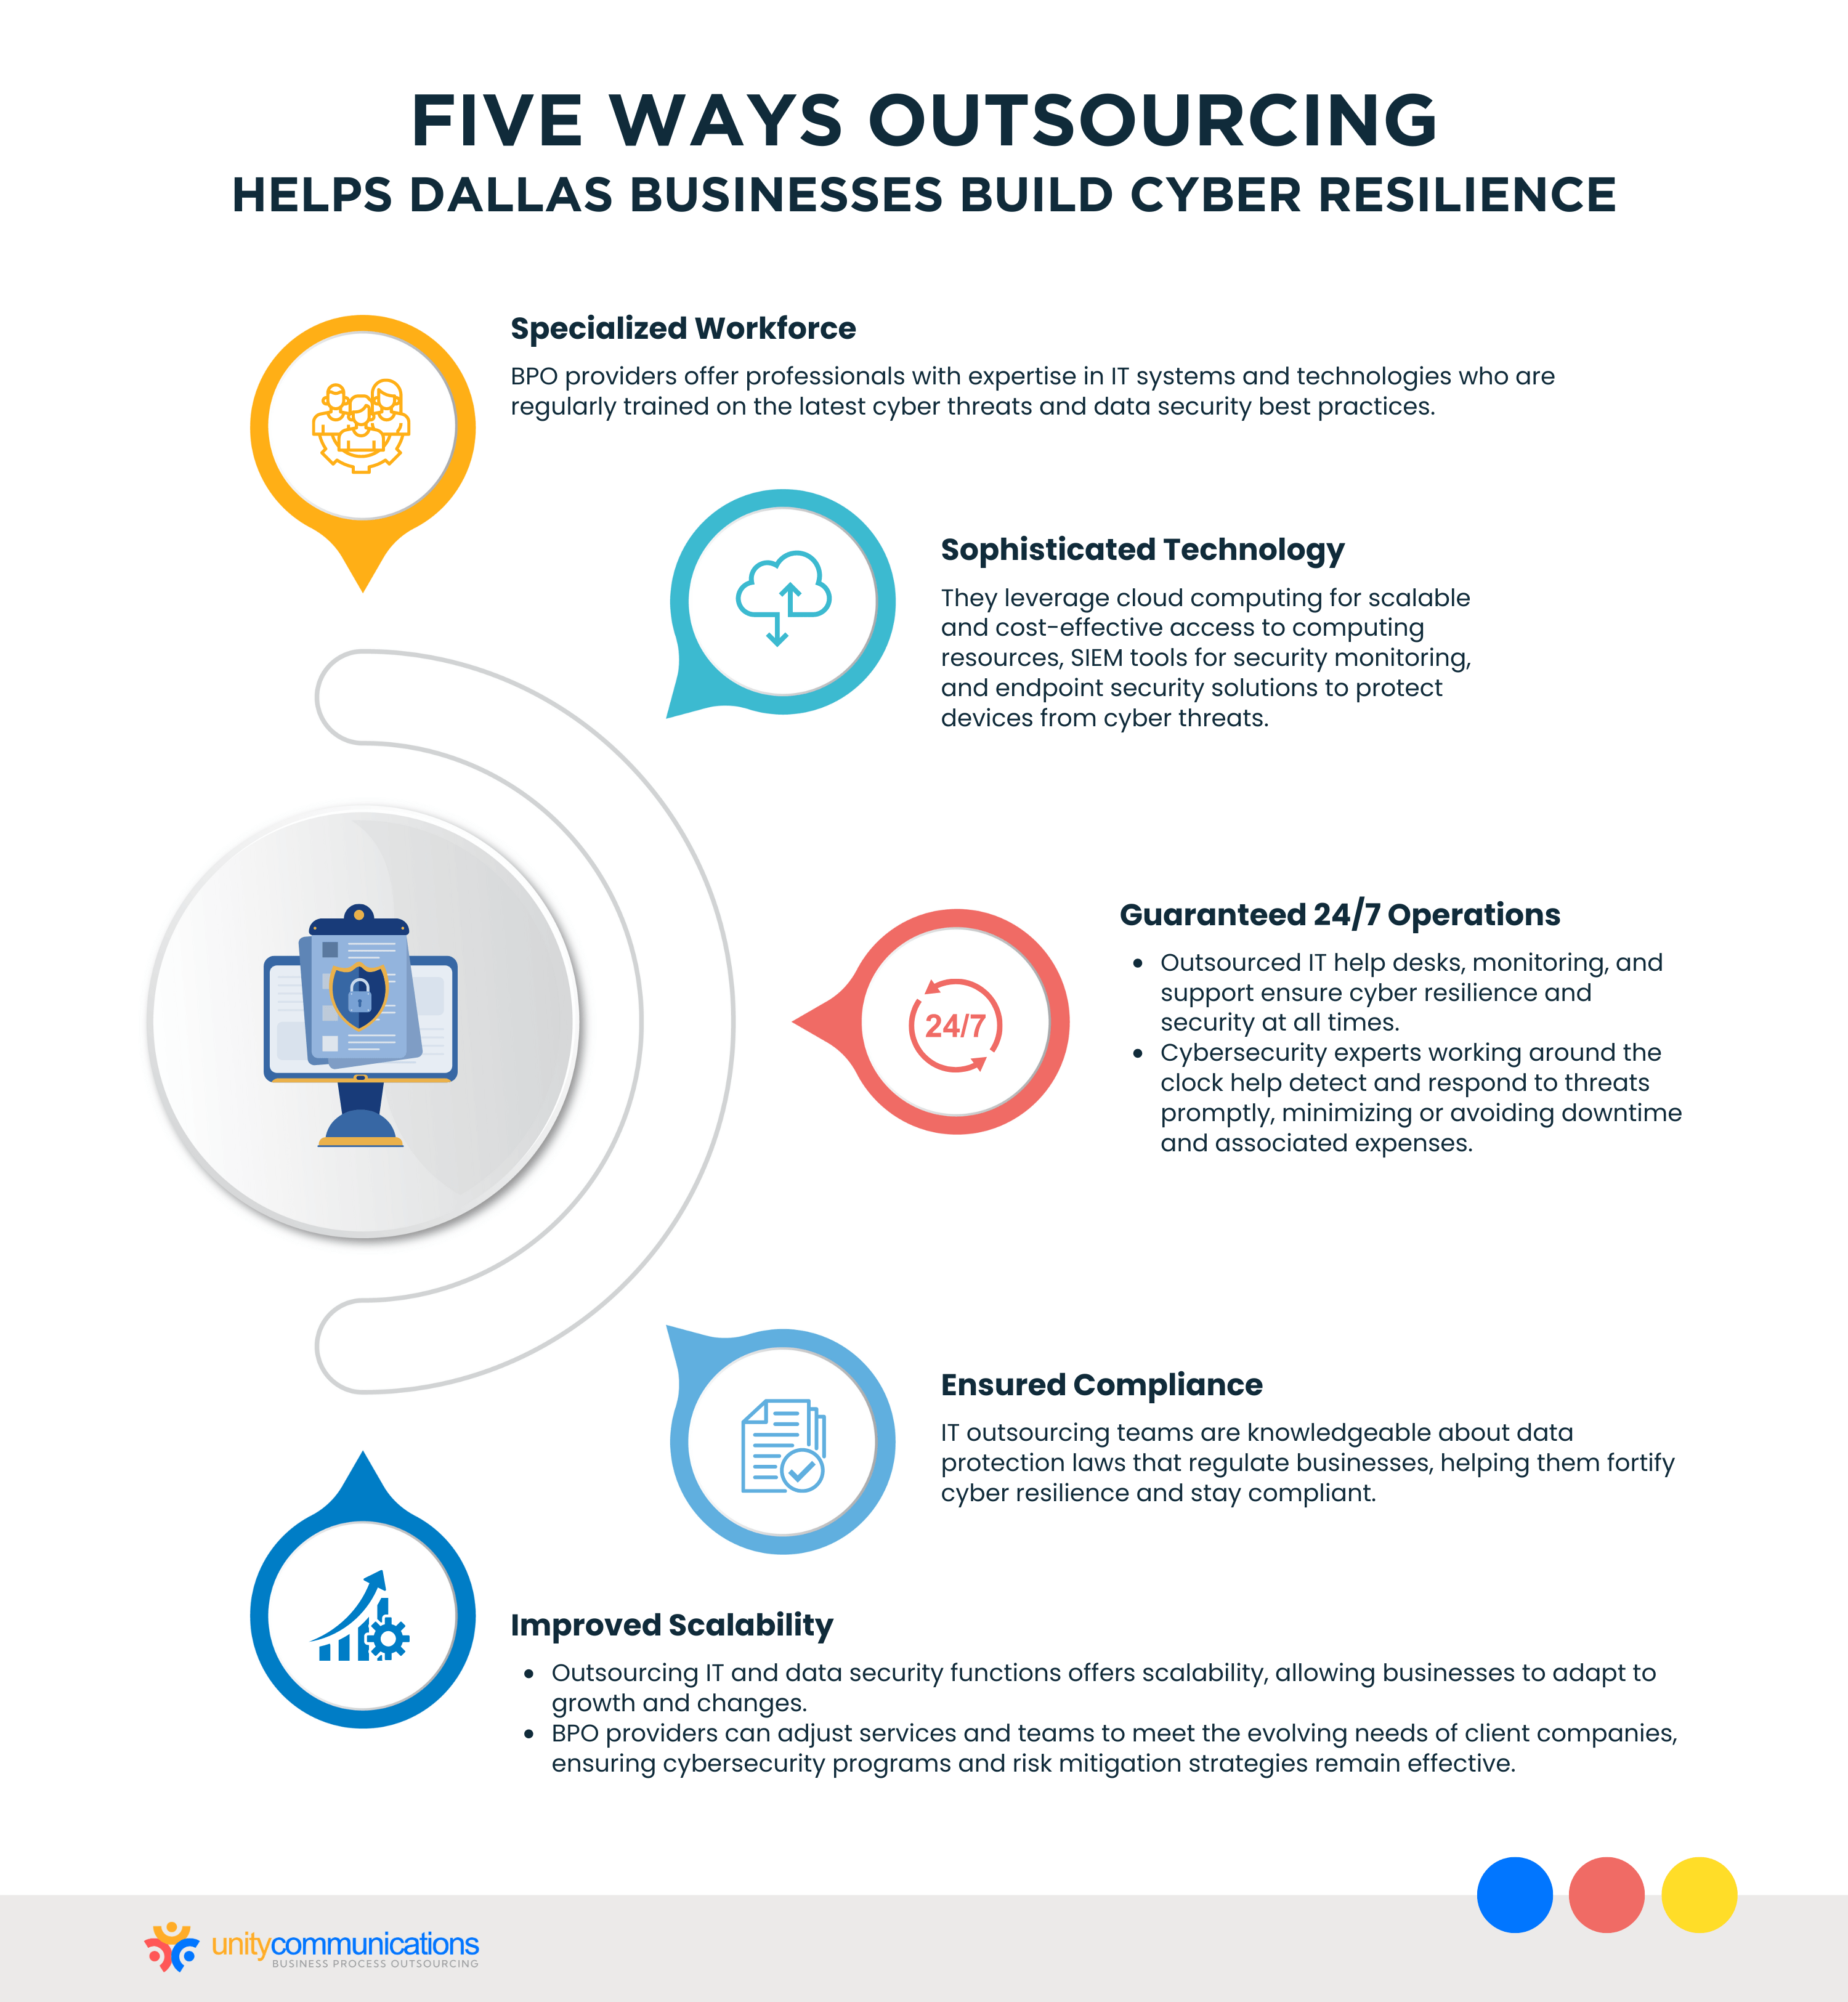 Five Ways Outsourcing Helps Dallas Businesses Build Cyber Resilience